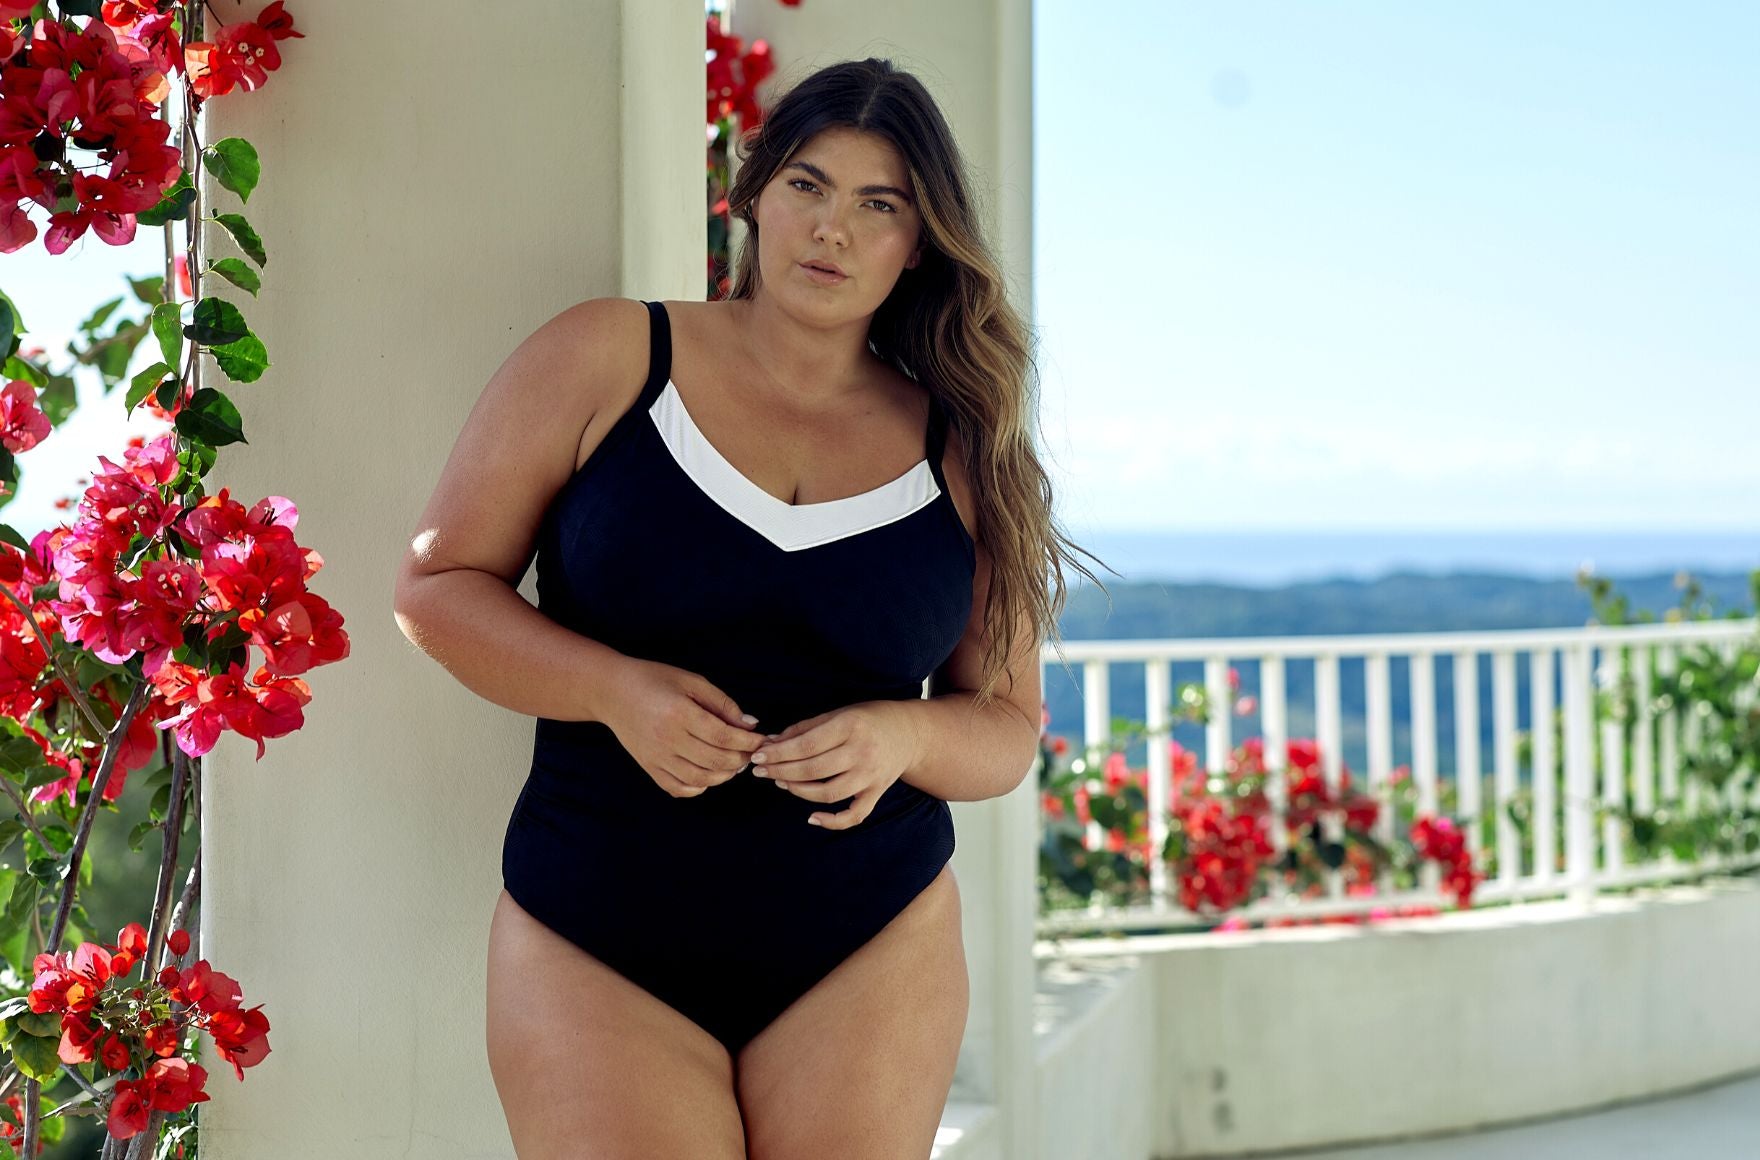 Breast Support : Swimsuits, Bathing Suits & Swimwear for Women